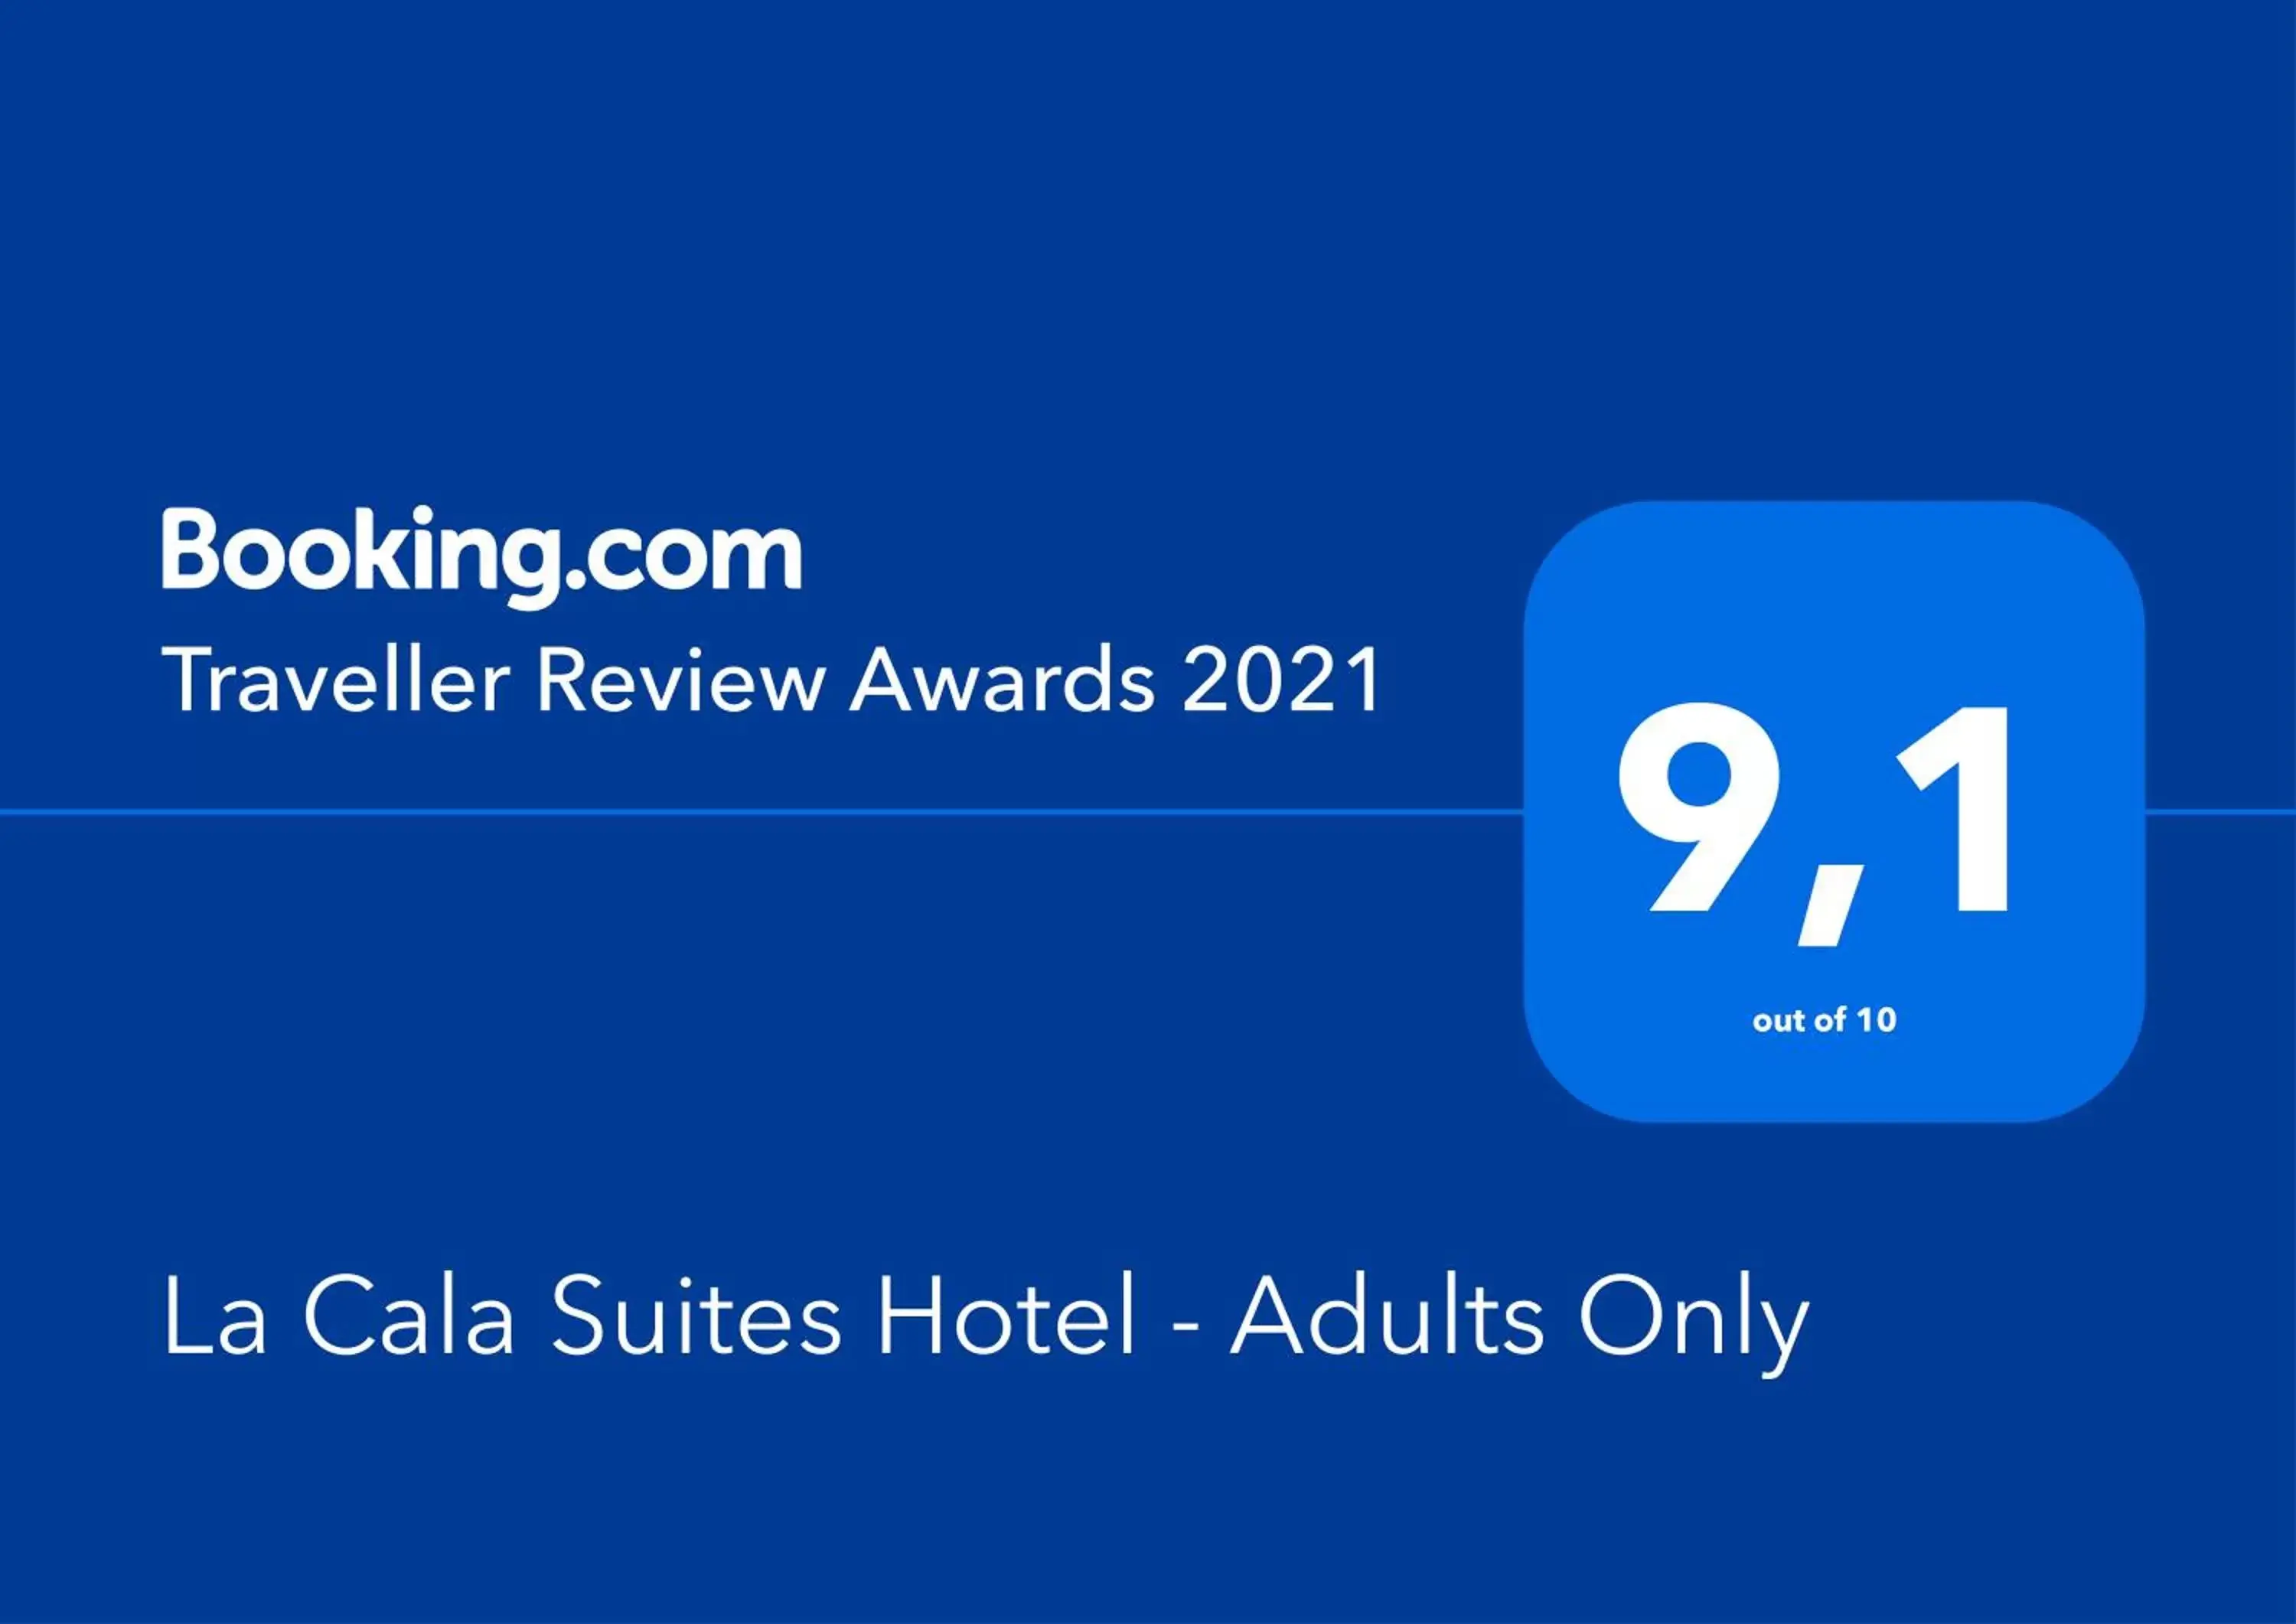 Other, Logo/Certificate/Sign/Award in CalaLanzarote Suites Hotel - Adults Only